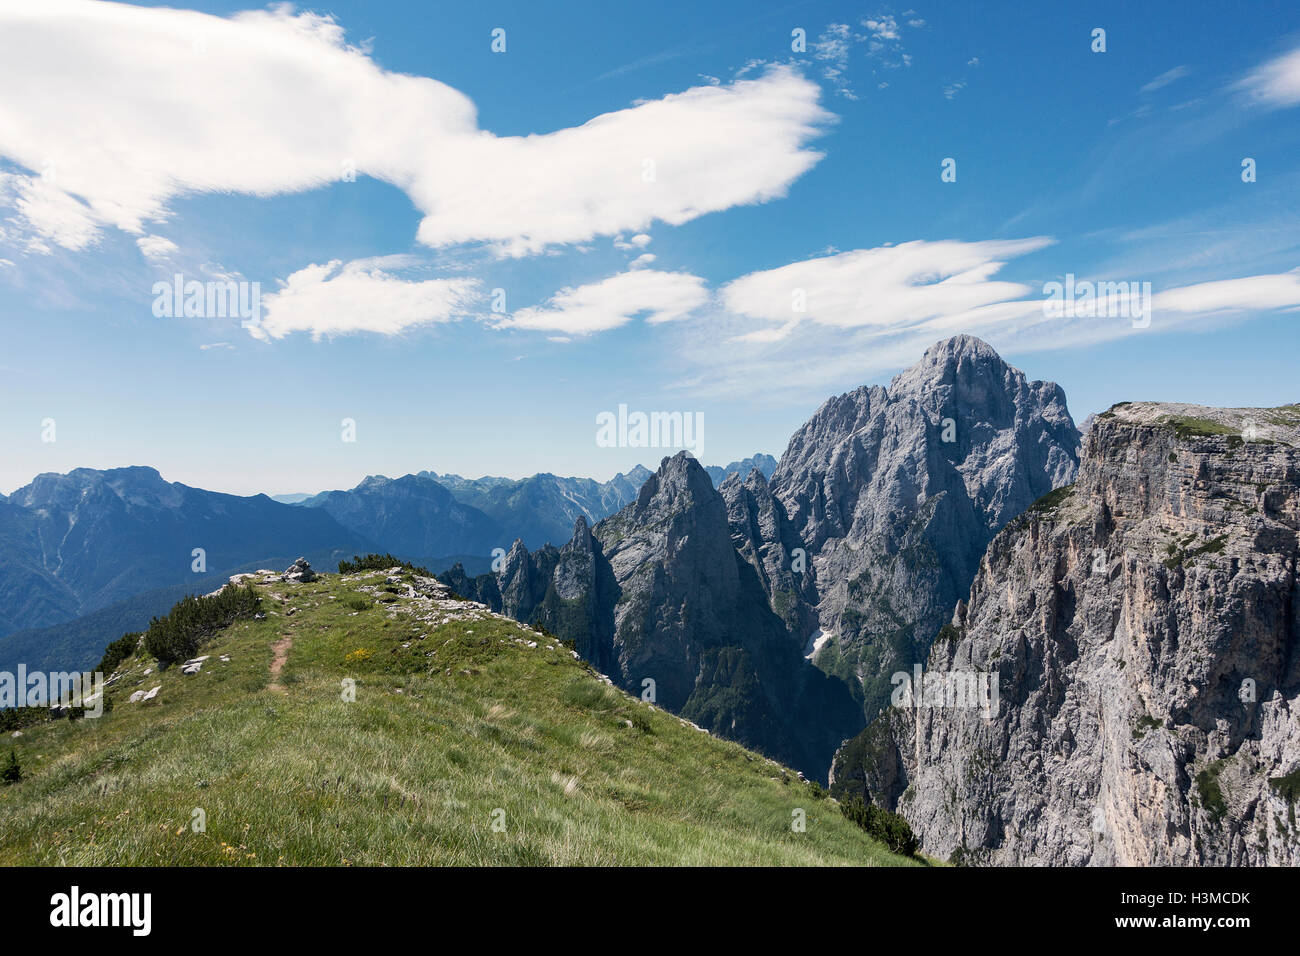 View from BASE jumping spot to cliffs on other side of the valley, Col di Pra, Italian Alps, Alleghe, Belluno, Italy Stock Photo